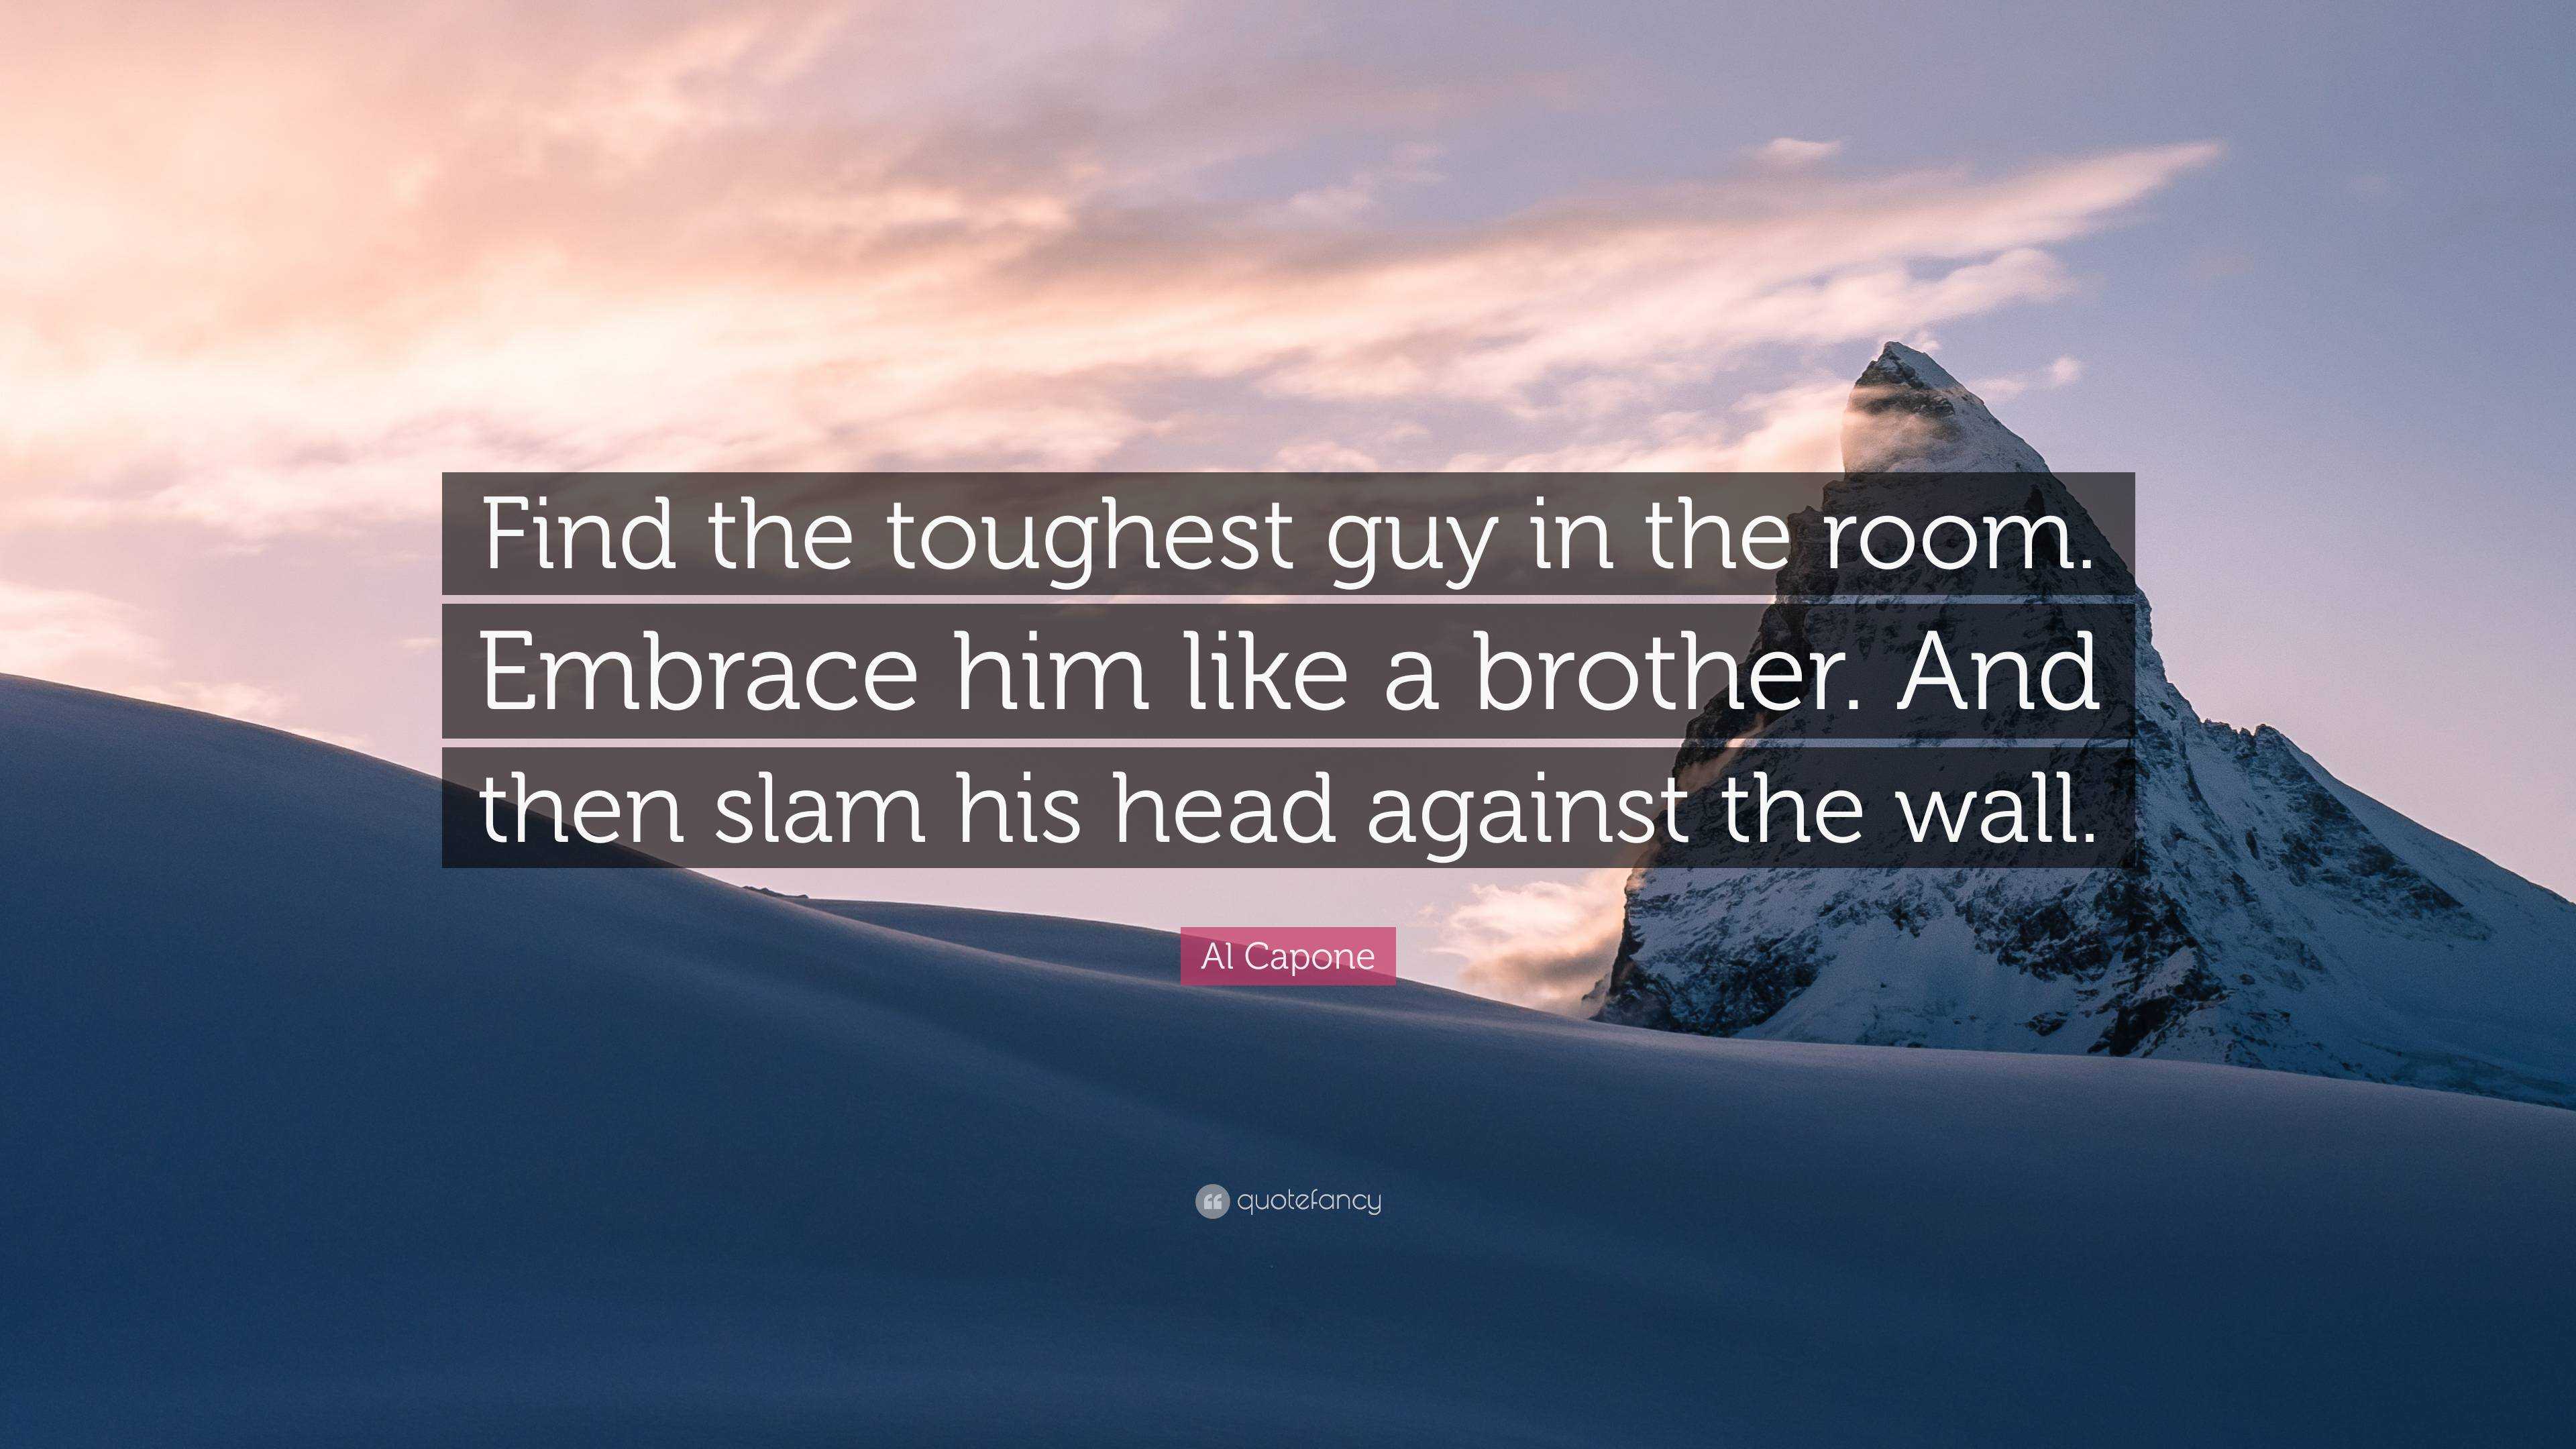 Al Capone Quote: “Find the toughest guy in the room. Embrace him